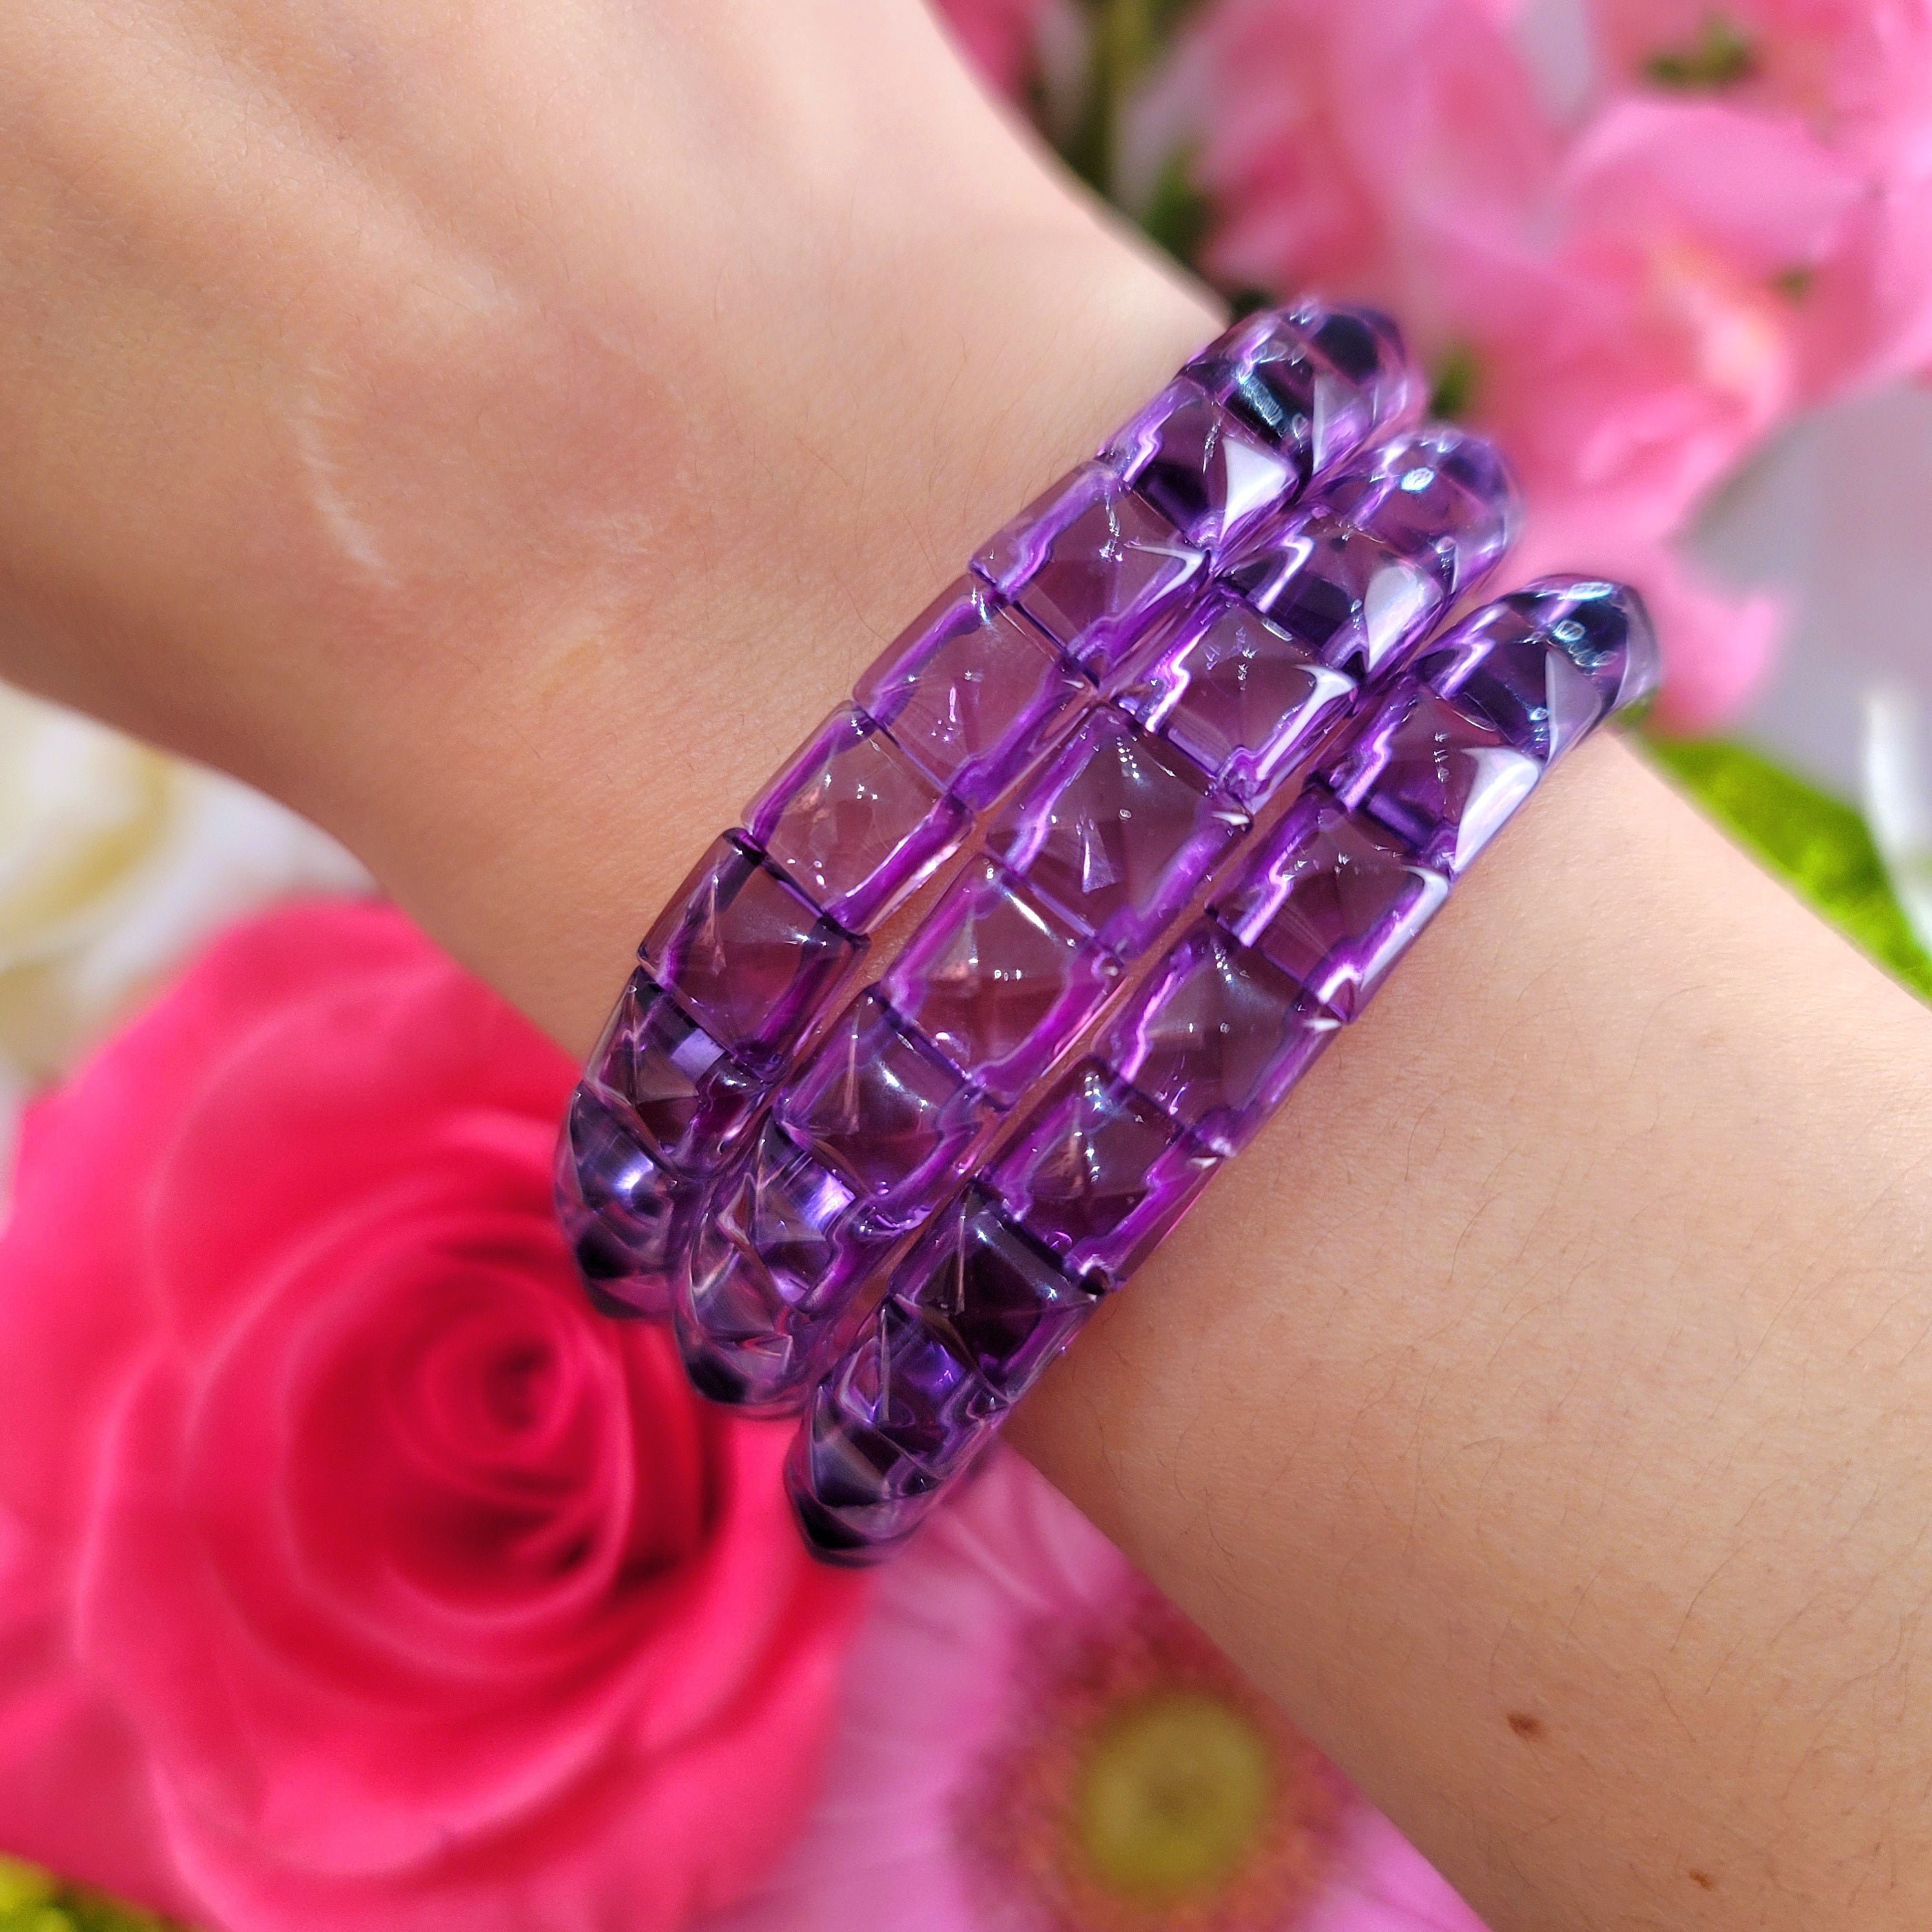 Amethyst Pyramid Stretchy Bangle Bracelet for Clarity, Intuition and Protection